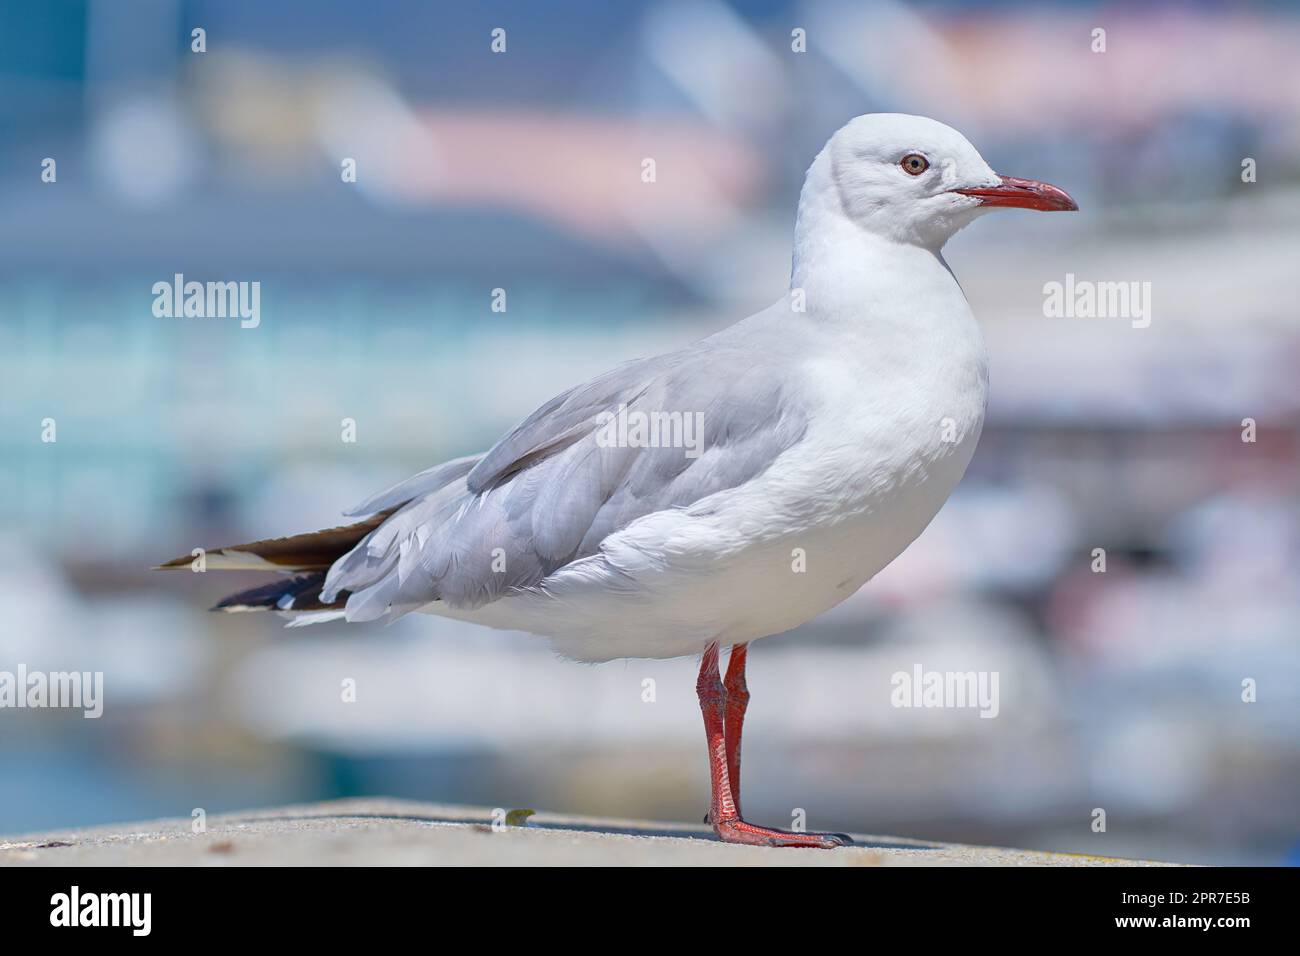 A red billed gull standing on a city dock against a blurred background with copy space. Closeup birdwatching of a white, grey seagull bird with beautiful feather textures near a harbor Stock Photo